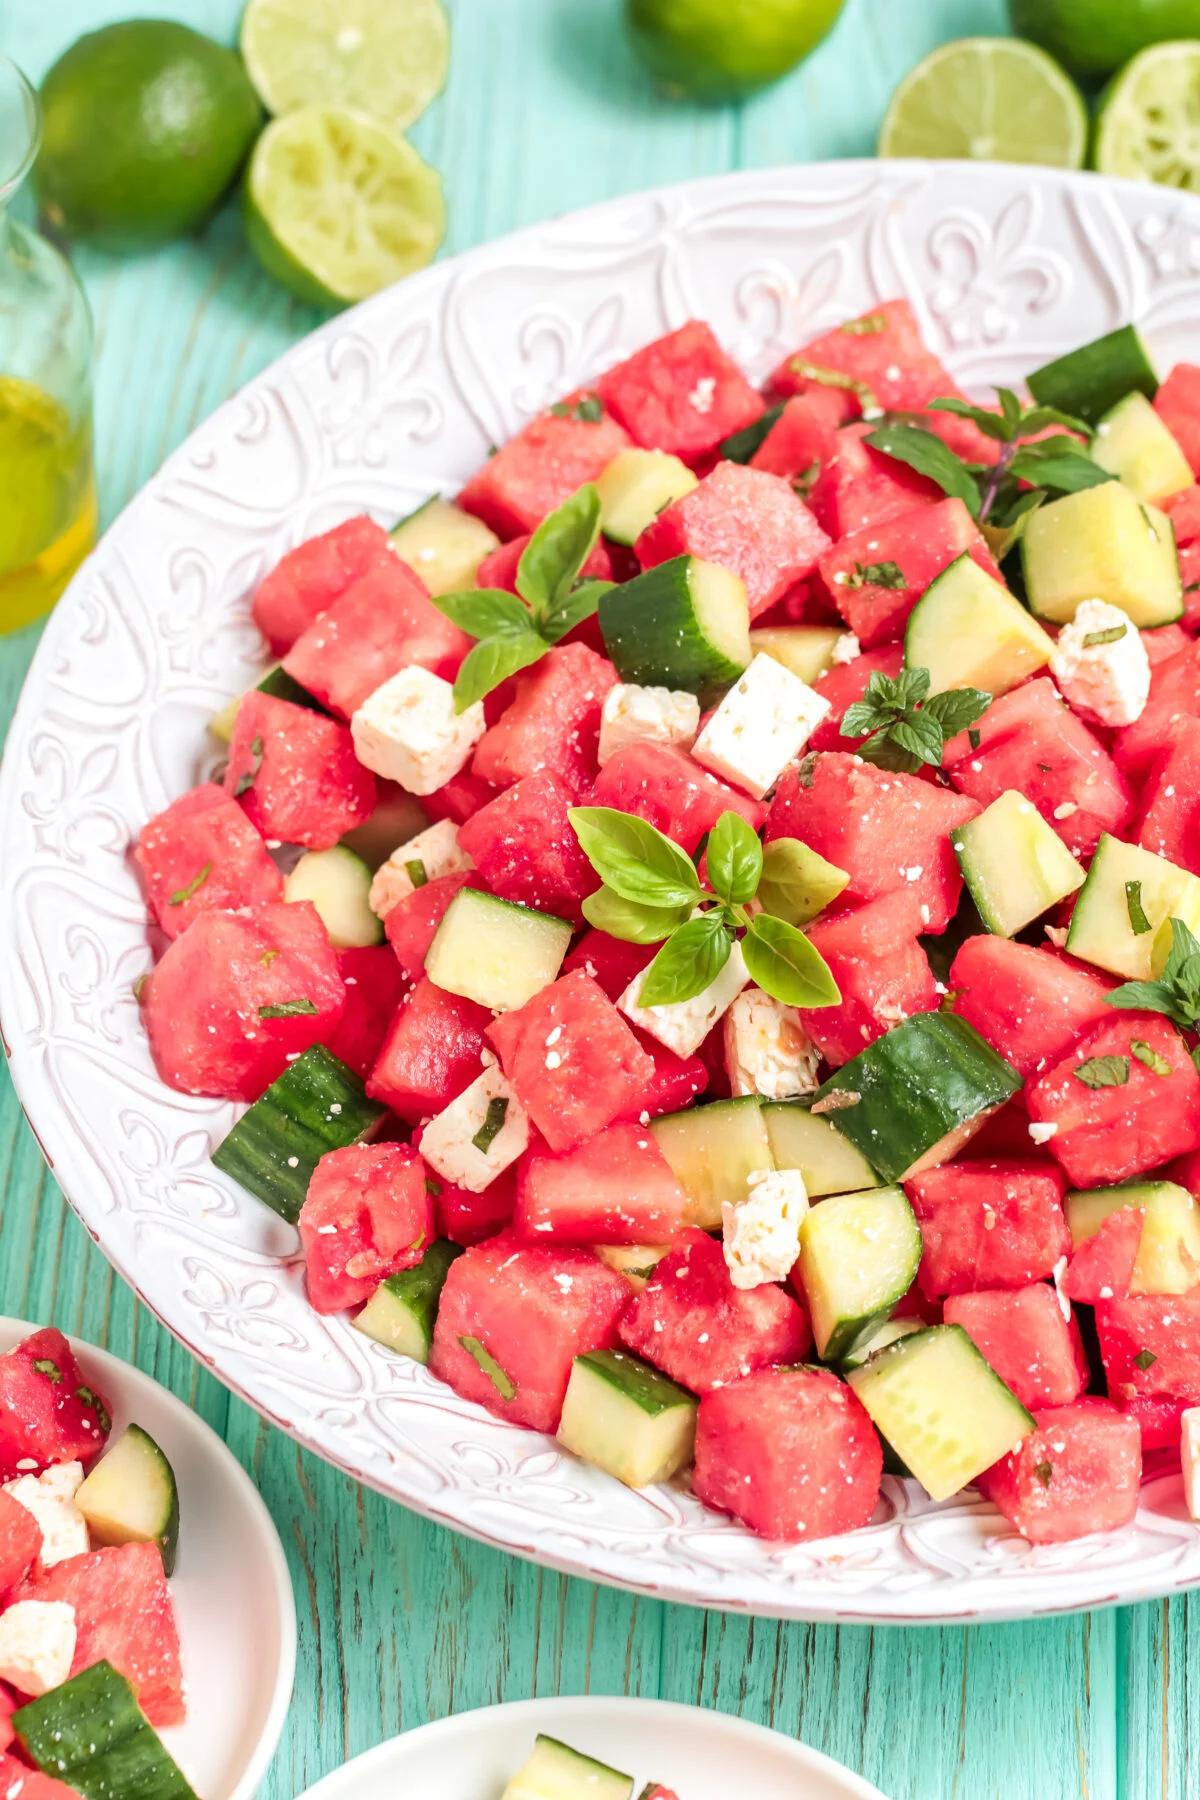 Stay cool on hot days with this delicious, refreshing summer recipe for watermelon salad with feta and cucumber. It's bursting with flavour!